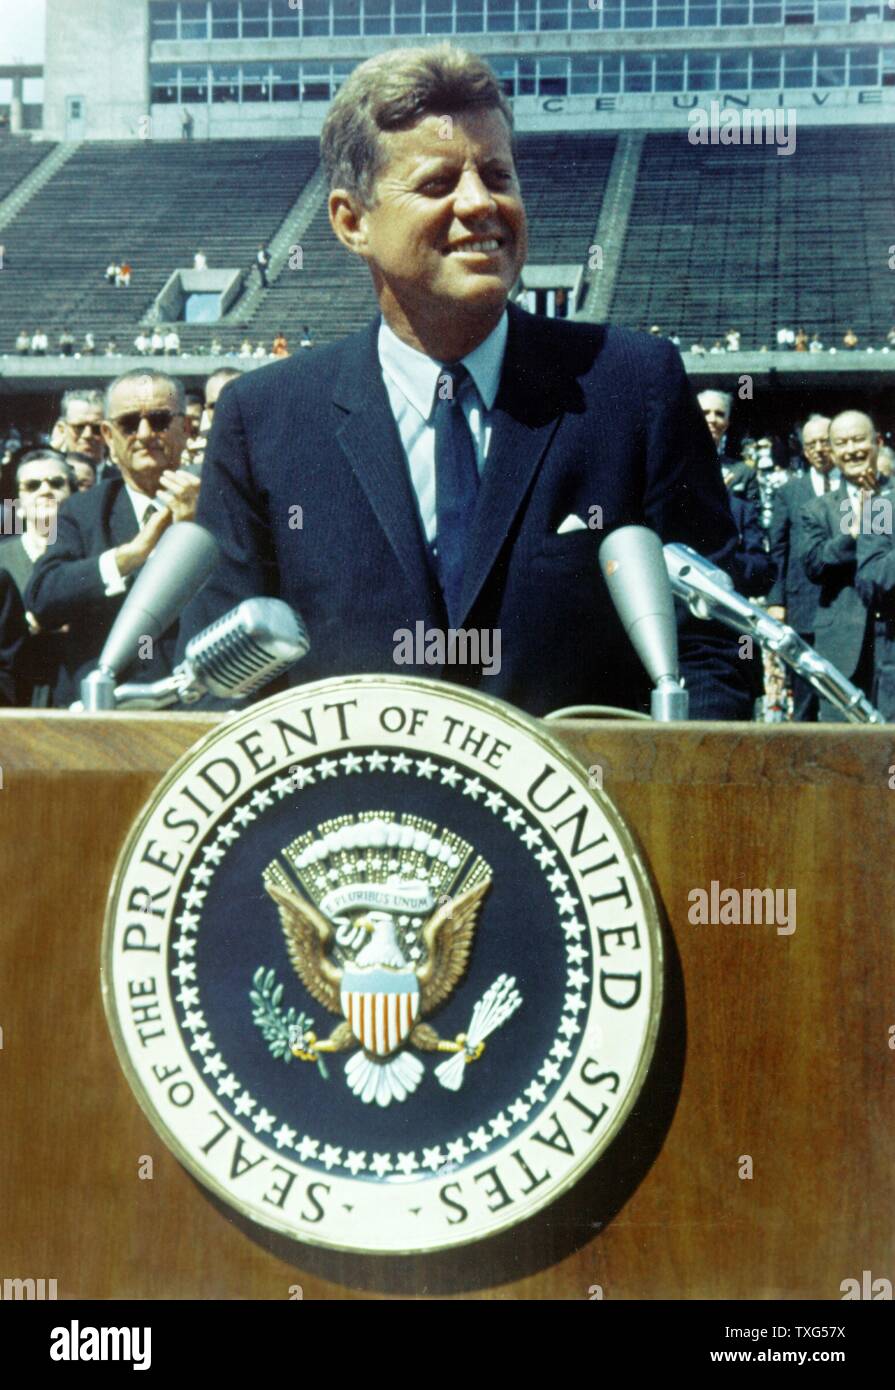 John F Kennedy, 35th President of the United States of America (1961-1963) spaking on travel to the Moon, Rice University Stadium 12 September 1962 Stock Photo